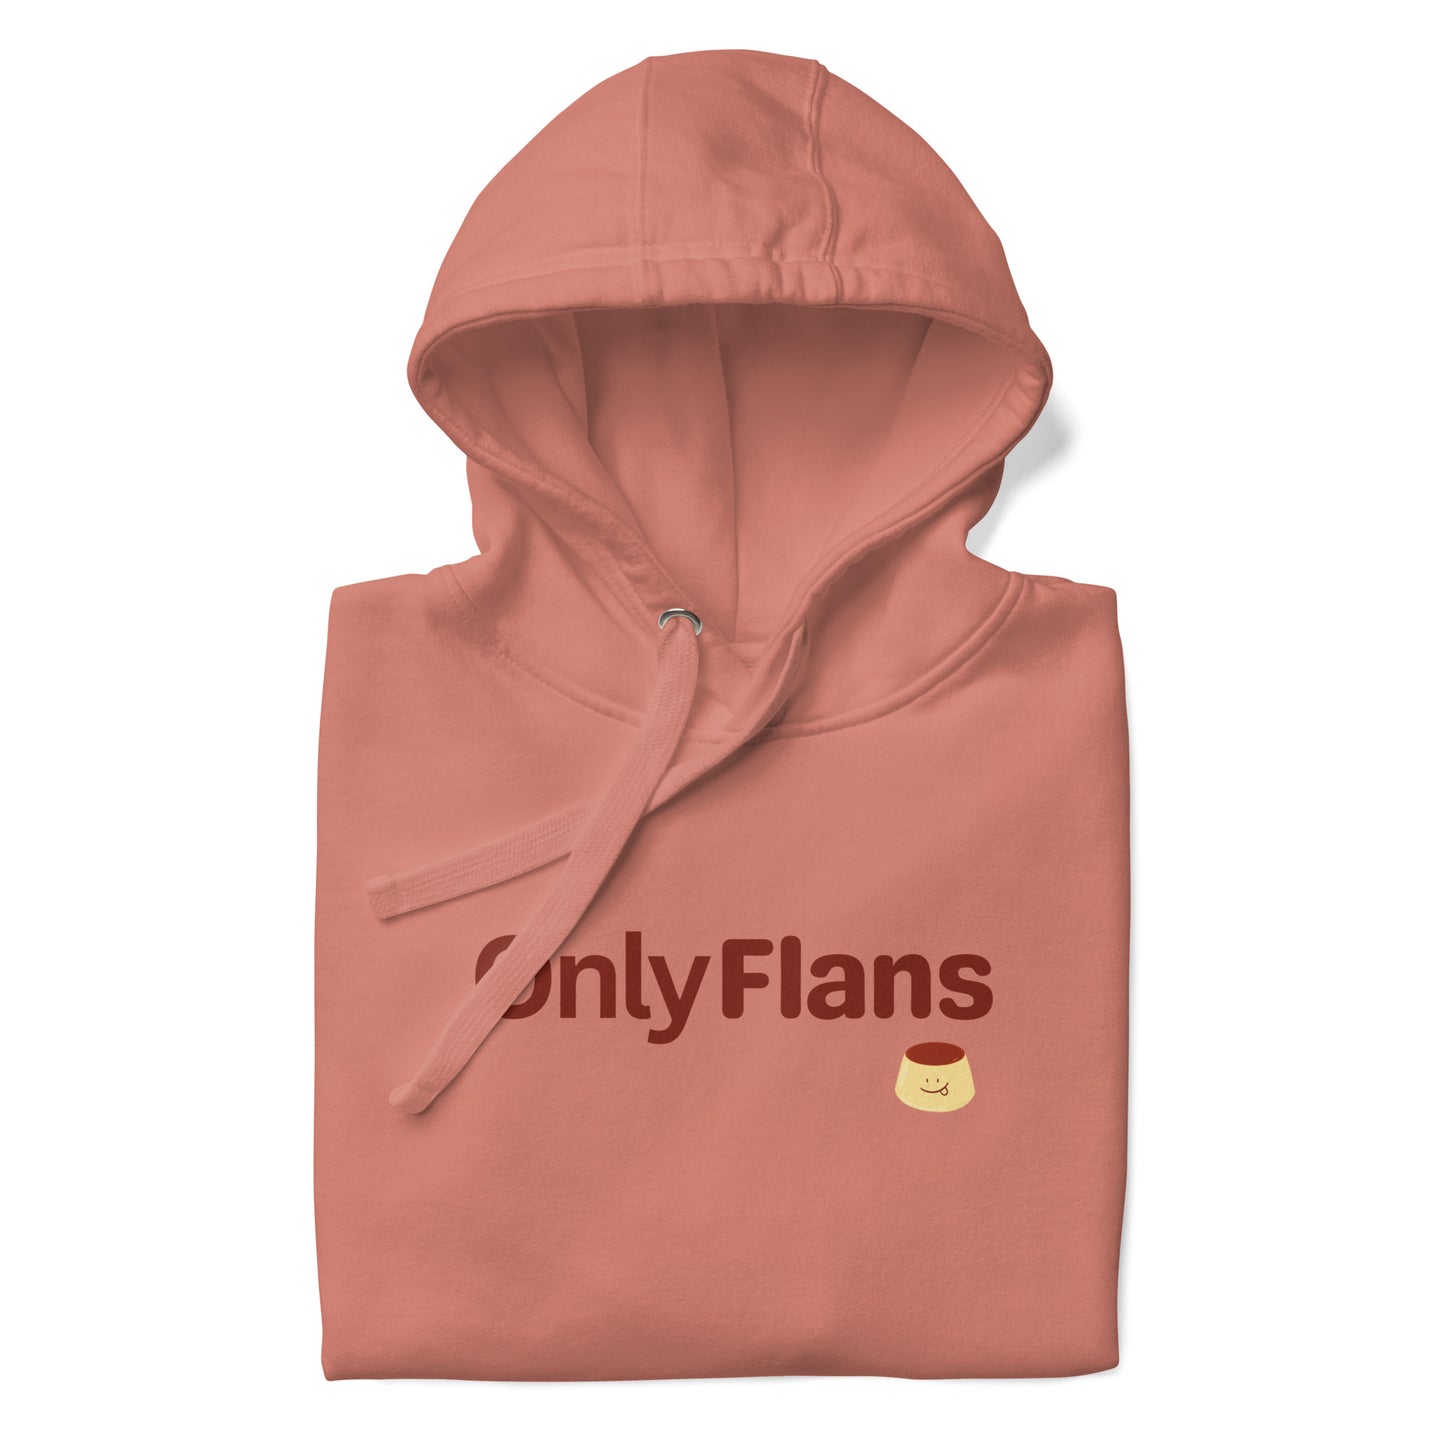 Only Flans Hoodie